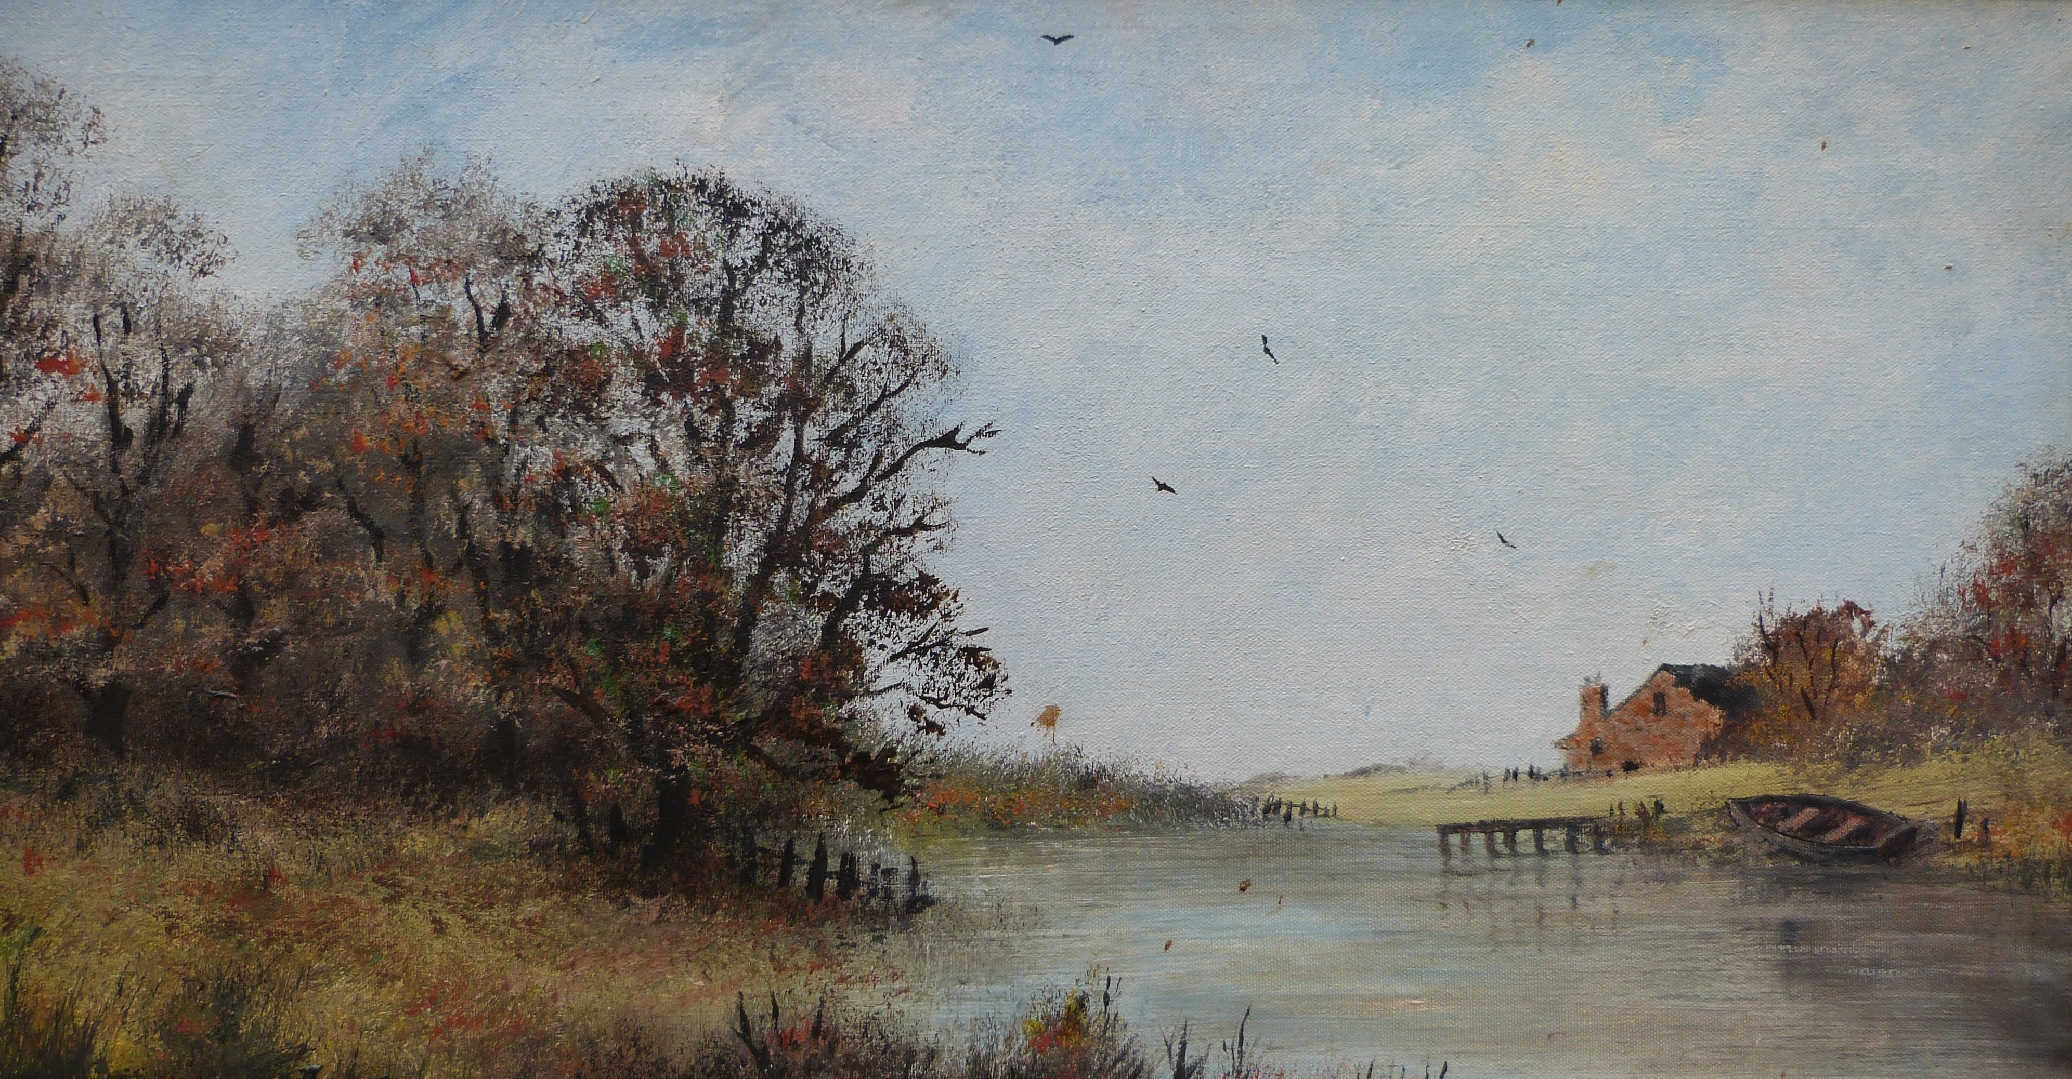 Digby Page 'Autumn Peace' oil on canvas